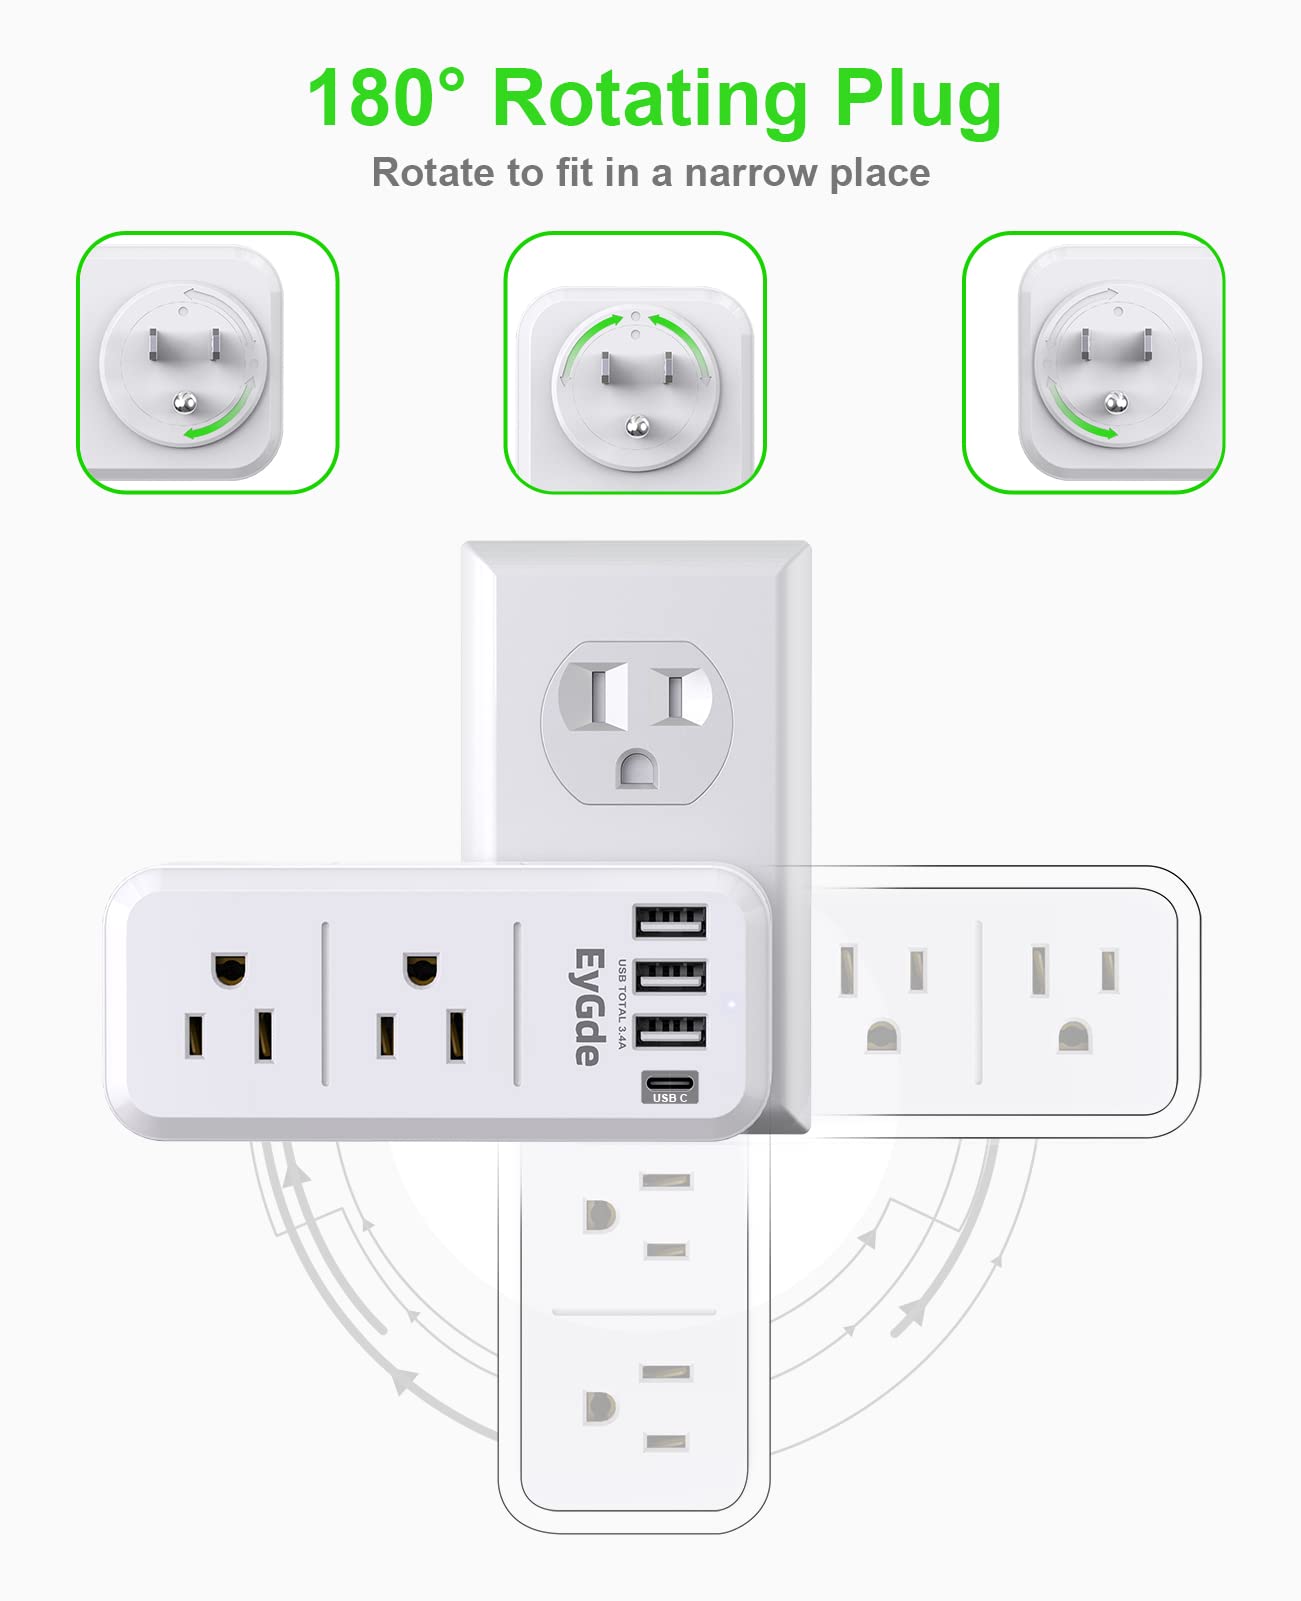 EyGde Multi Plug Outlet Extender Surge Protector 1700J, Wall Power Strip with Rotating Plug & 4 USB Charging Ports (1 USB C), 3 Side Swivel Outlet Splitter with 6 Spaced Sockets for Home Office Travel